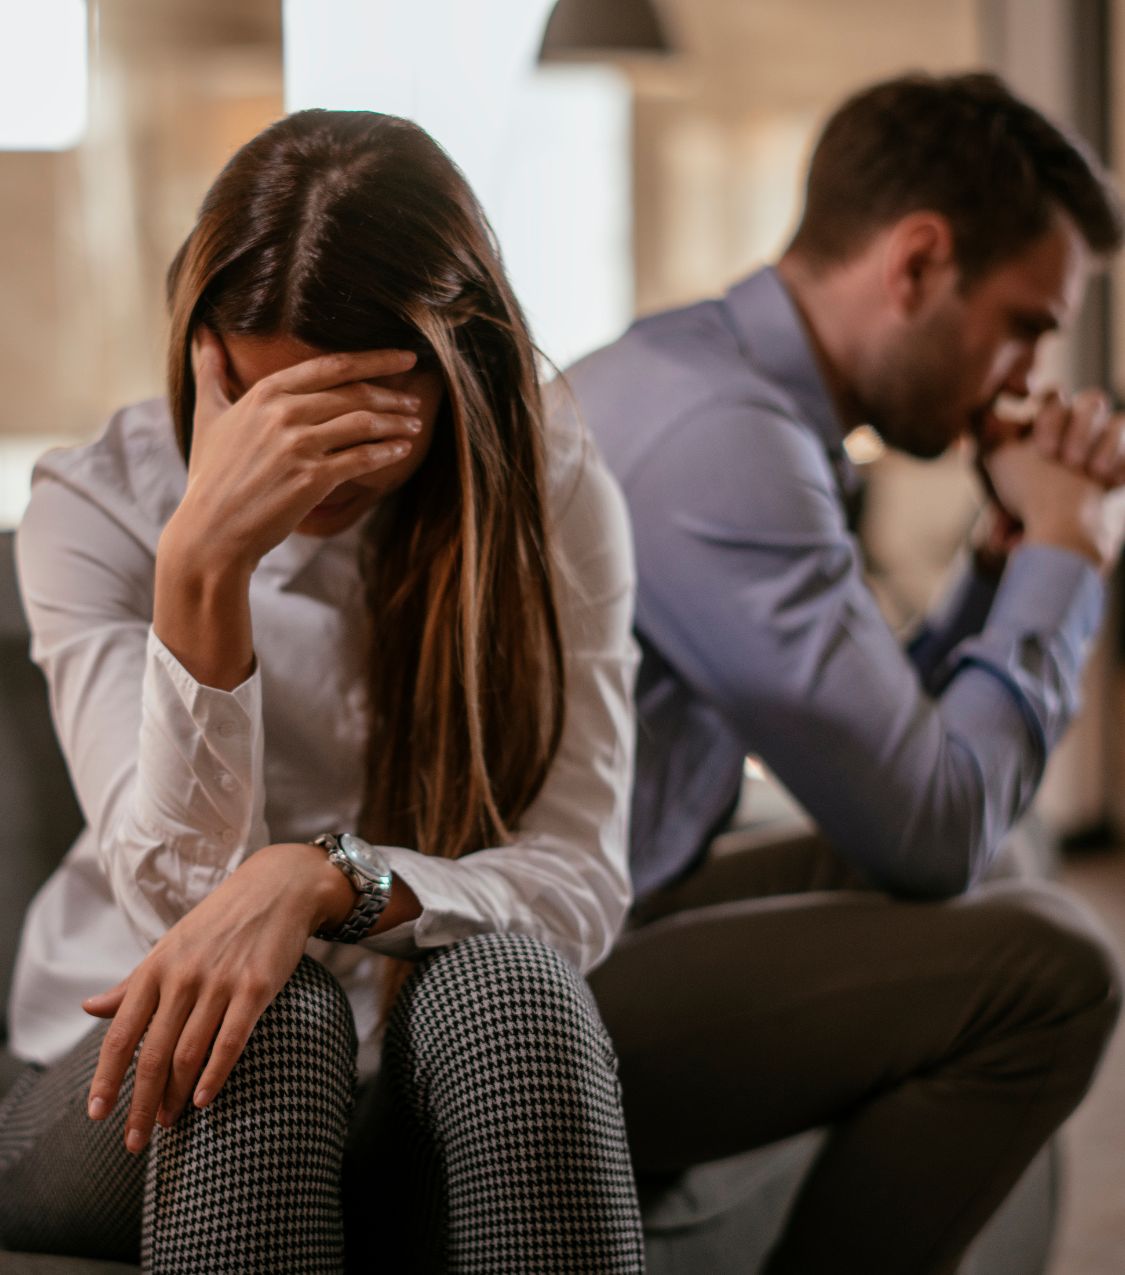 Image of a woman covering her eyes, turning away from her partner, symbolizing the challenges in affair recovery. If you or your partner have cheated and trying to make sense of your relationship, our experts in the United States and globally can help. Contact us in Florida, California, Colorado, New York, North Carolina, and beyond.